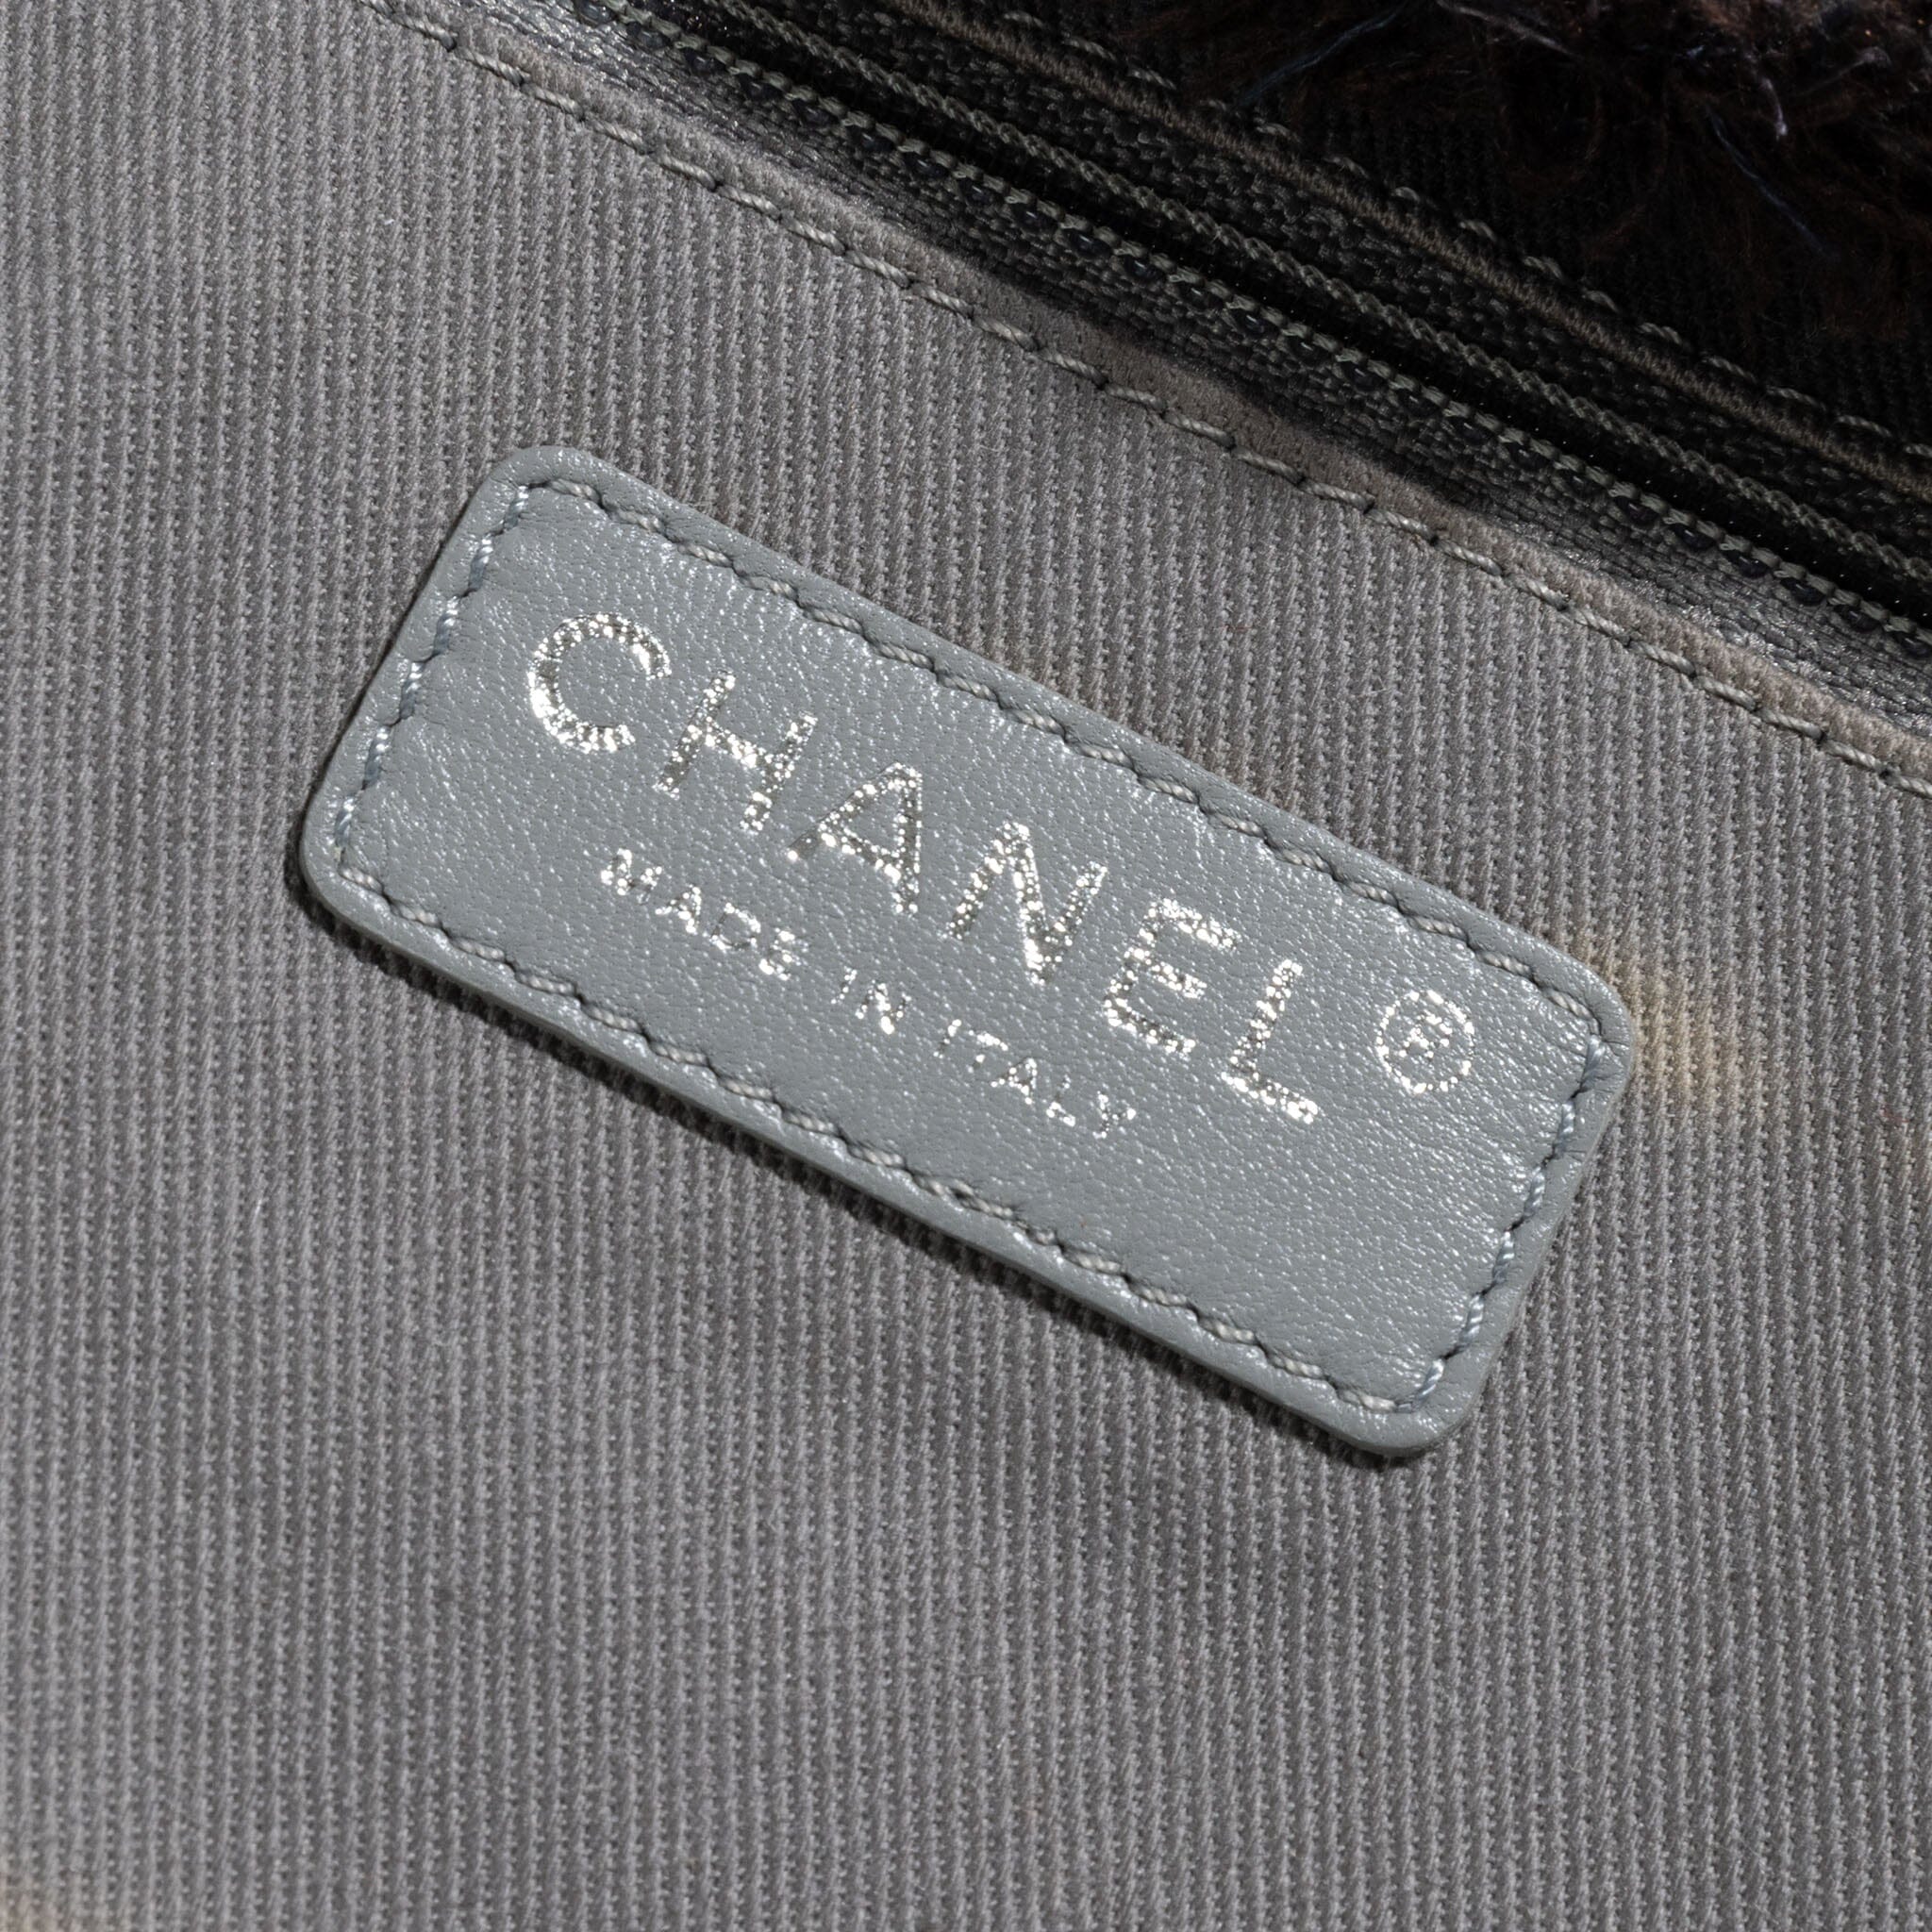 Chanel Limited Bag Oh My Boy Canvas Tote